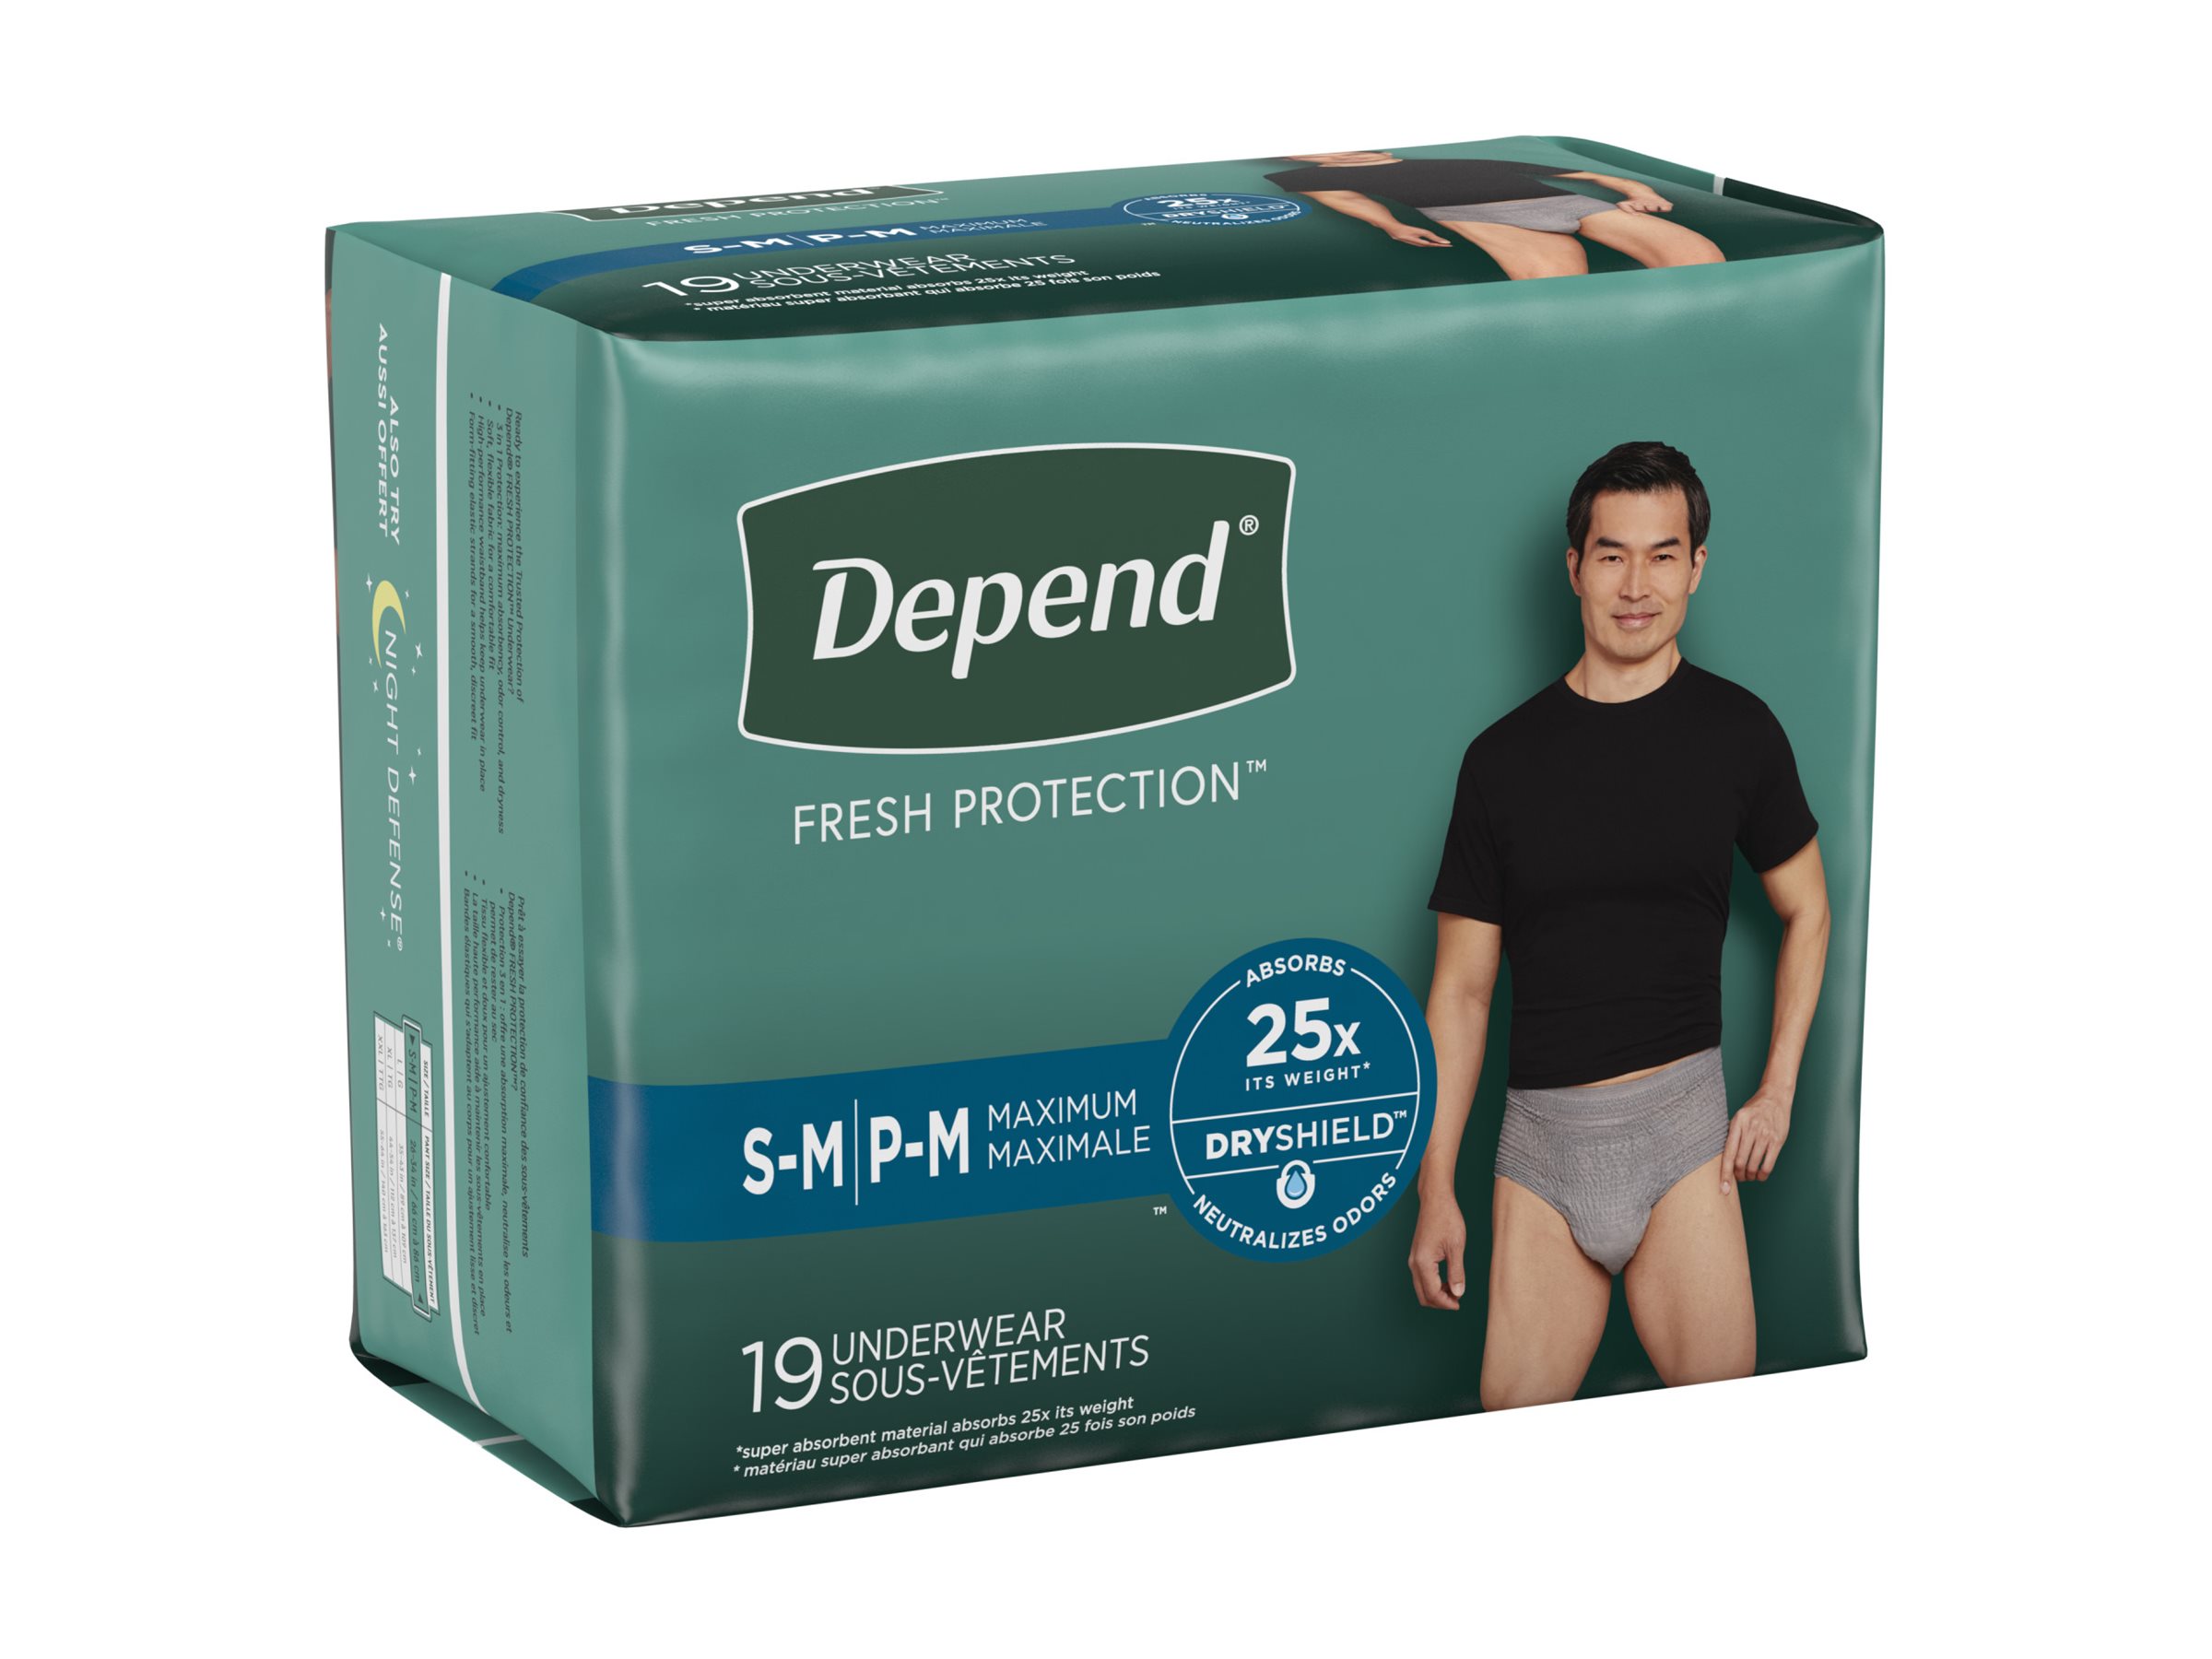 Poise Fresh Protection Incontinence Pads, Moderate Absorbency Regular/Long  ✓